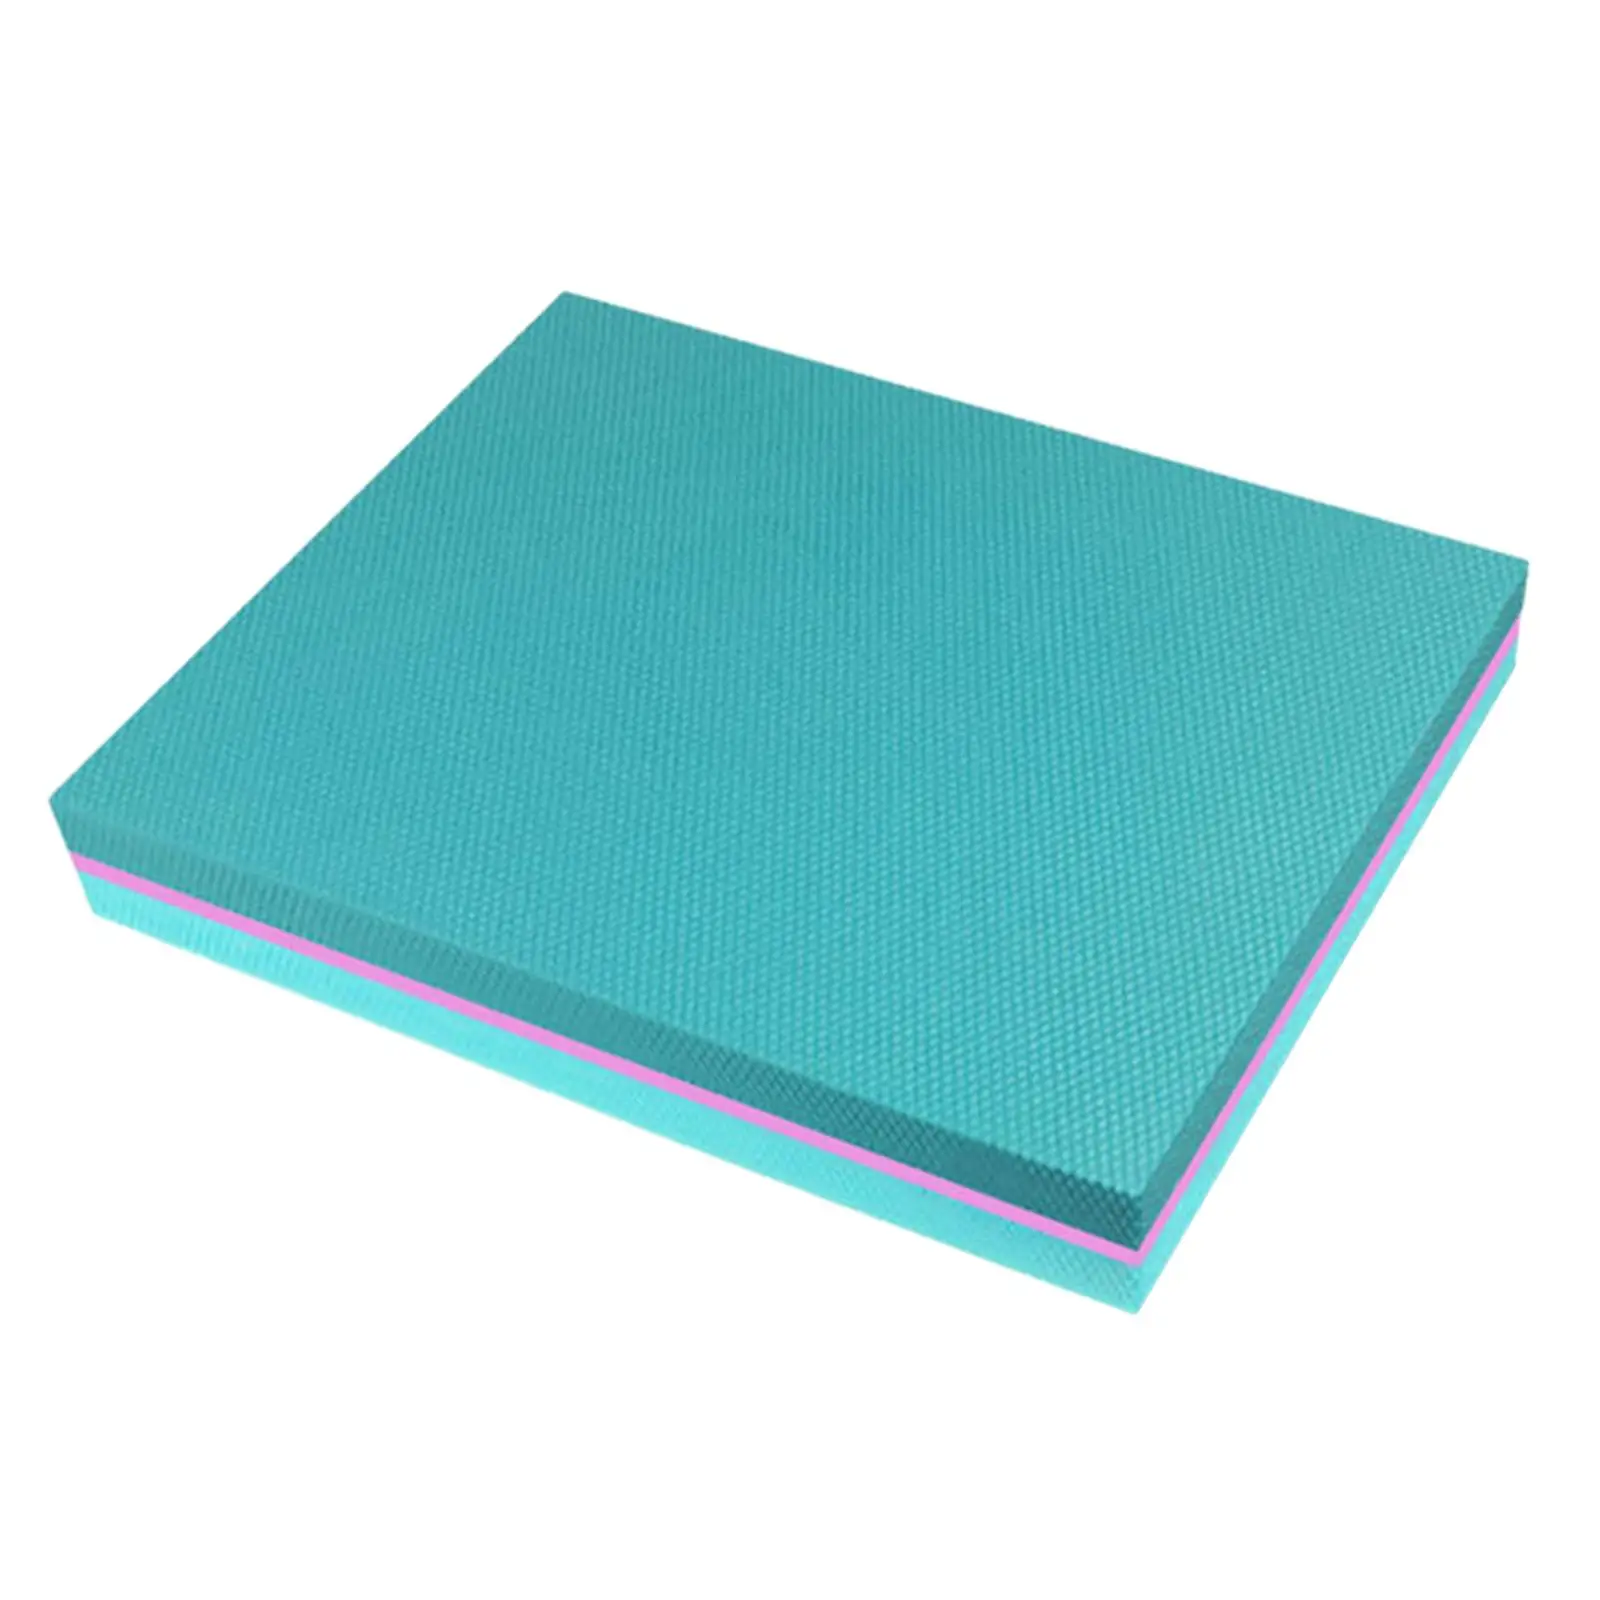 Yoga Mat Exercise Balance Pad Thick Kids Adult Knee Ankle Cushion Chair Cushion Equipment for Meditation, Stability Training